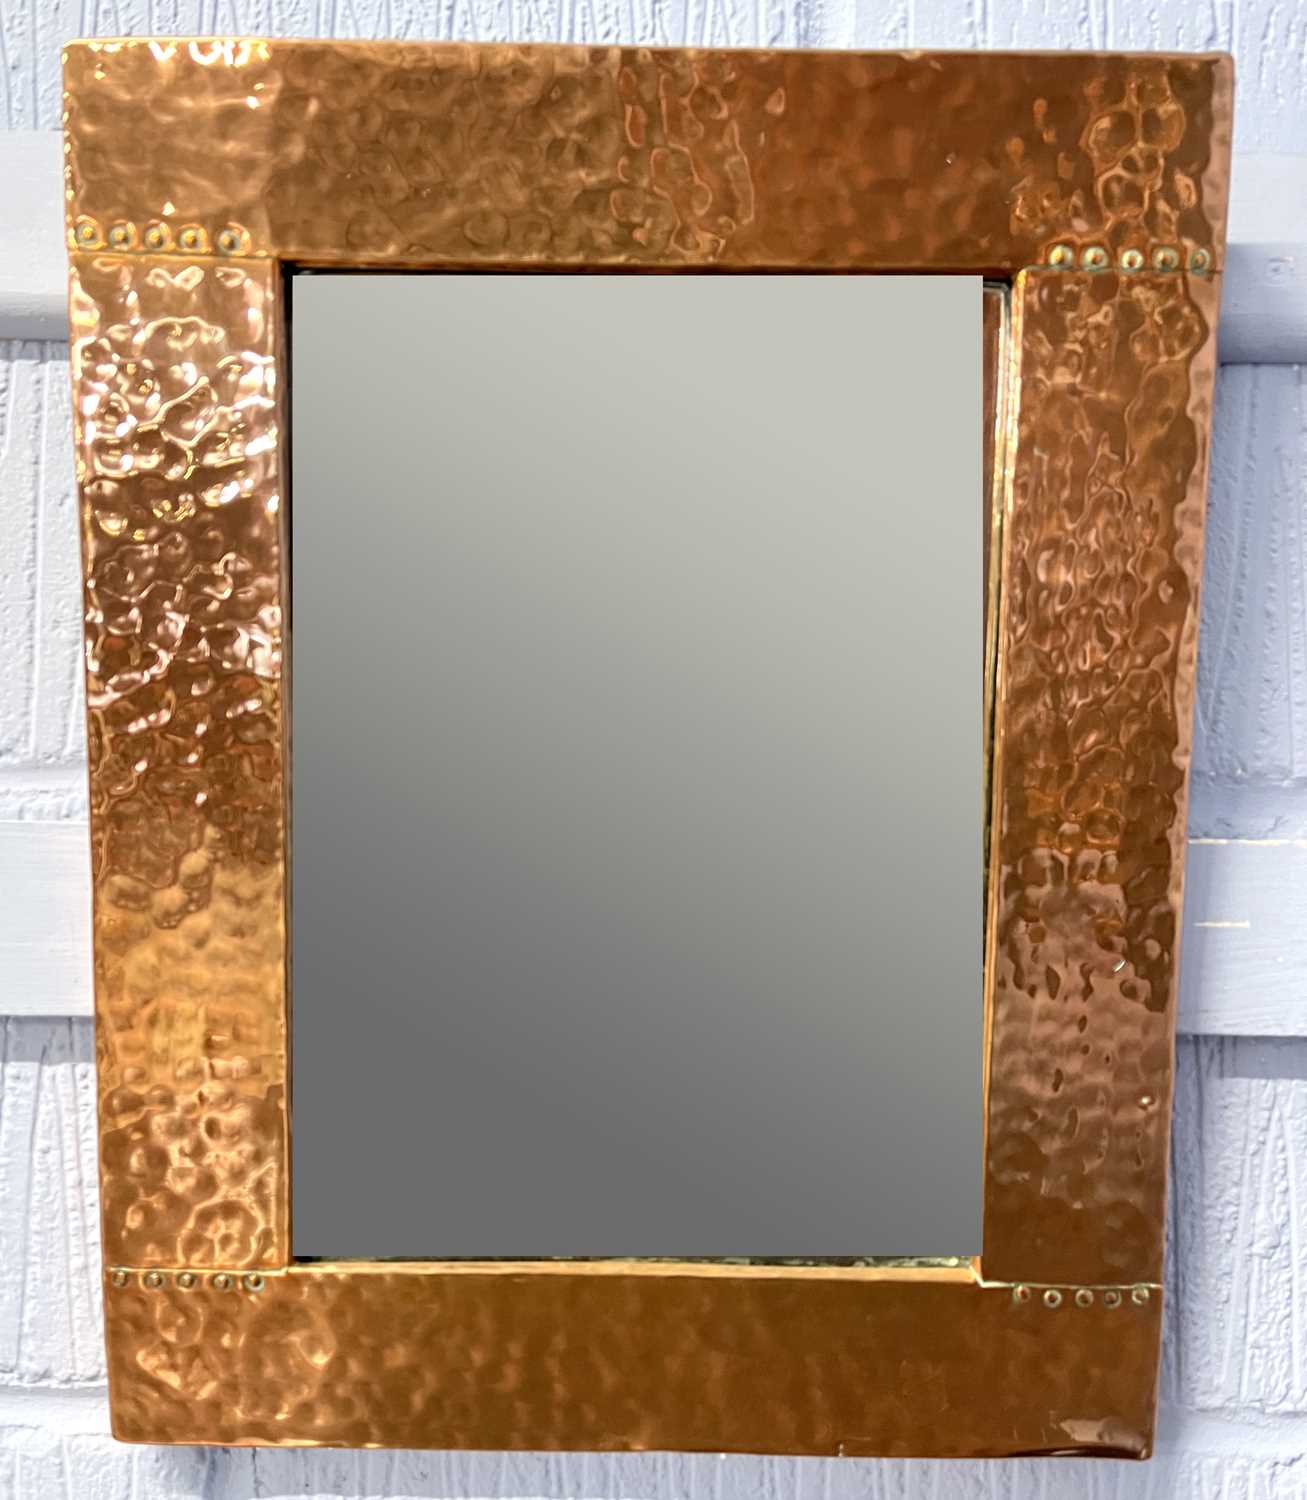 An Arts & Crafts style rectangular wall mirror in planished copper frame, 37 x 47cm - apparently